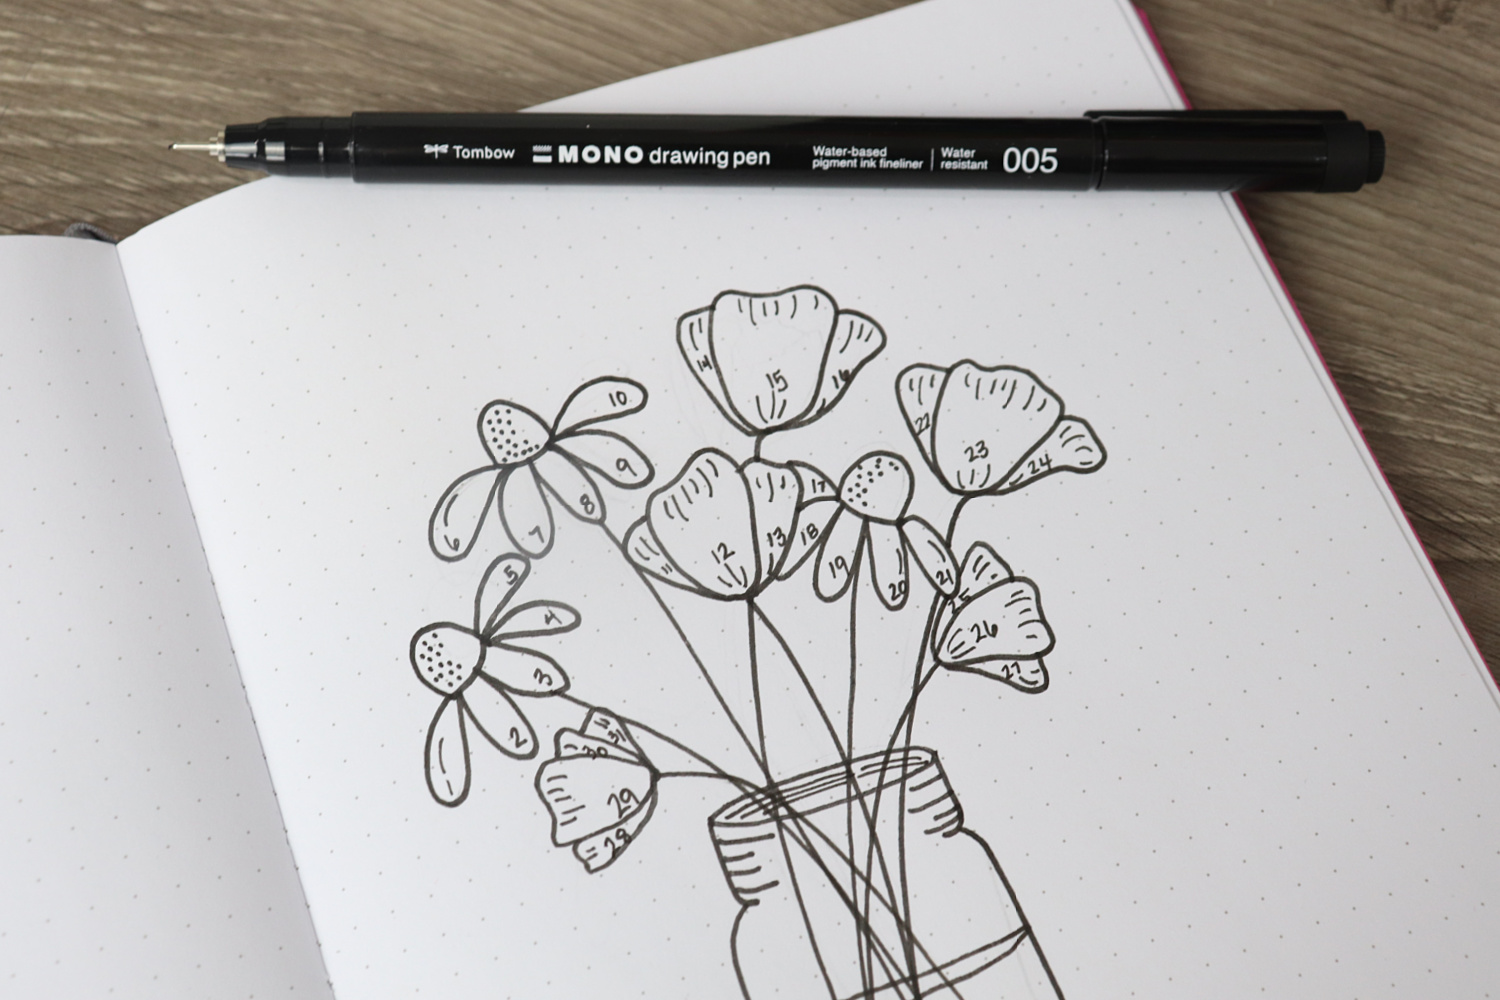 Image contains an open sketchbook with a flower bouquet mood tracker drawn in black ink. The flower petals are numbered 1-31 to correspond to the days of the month. A MONO Drawing Pen 005 sits on top of the page.